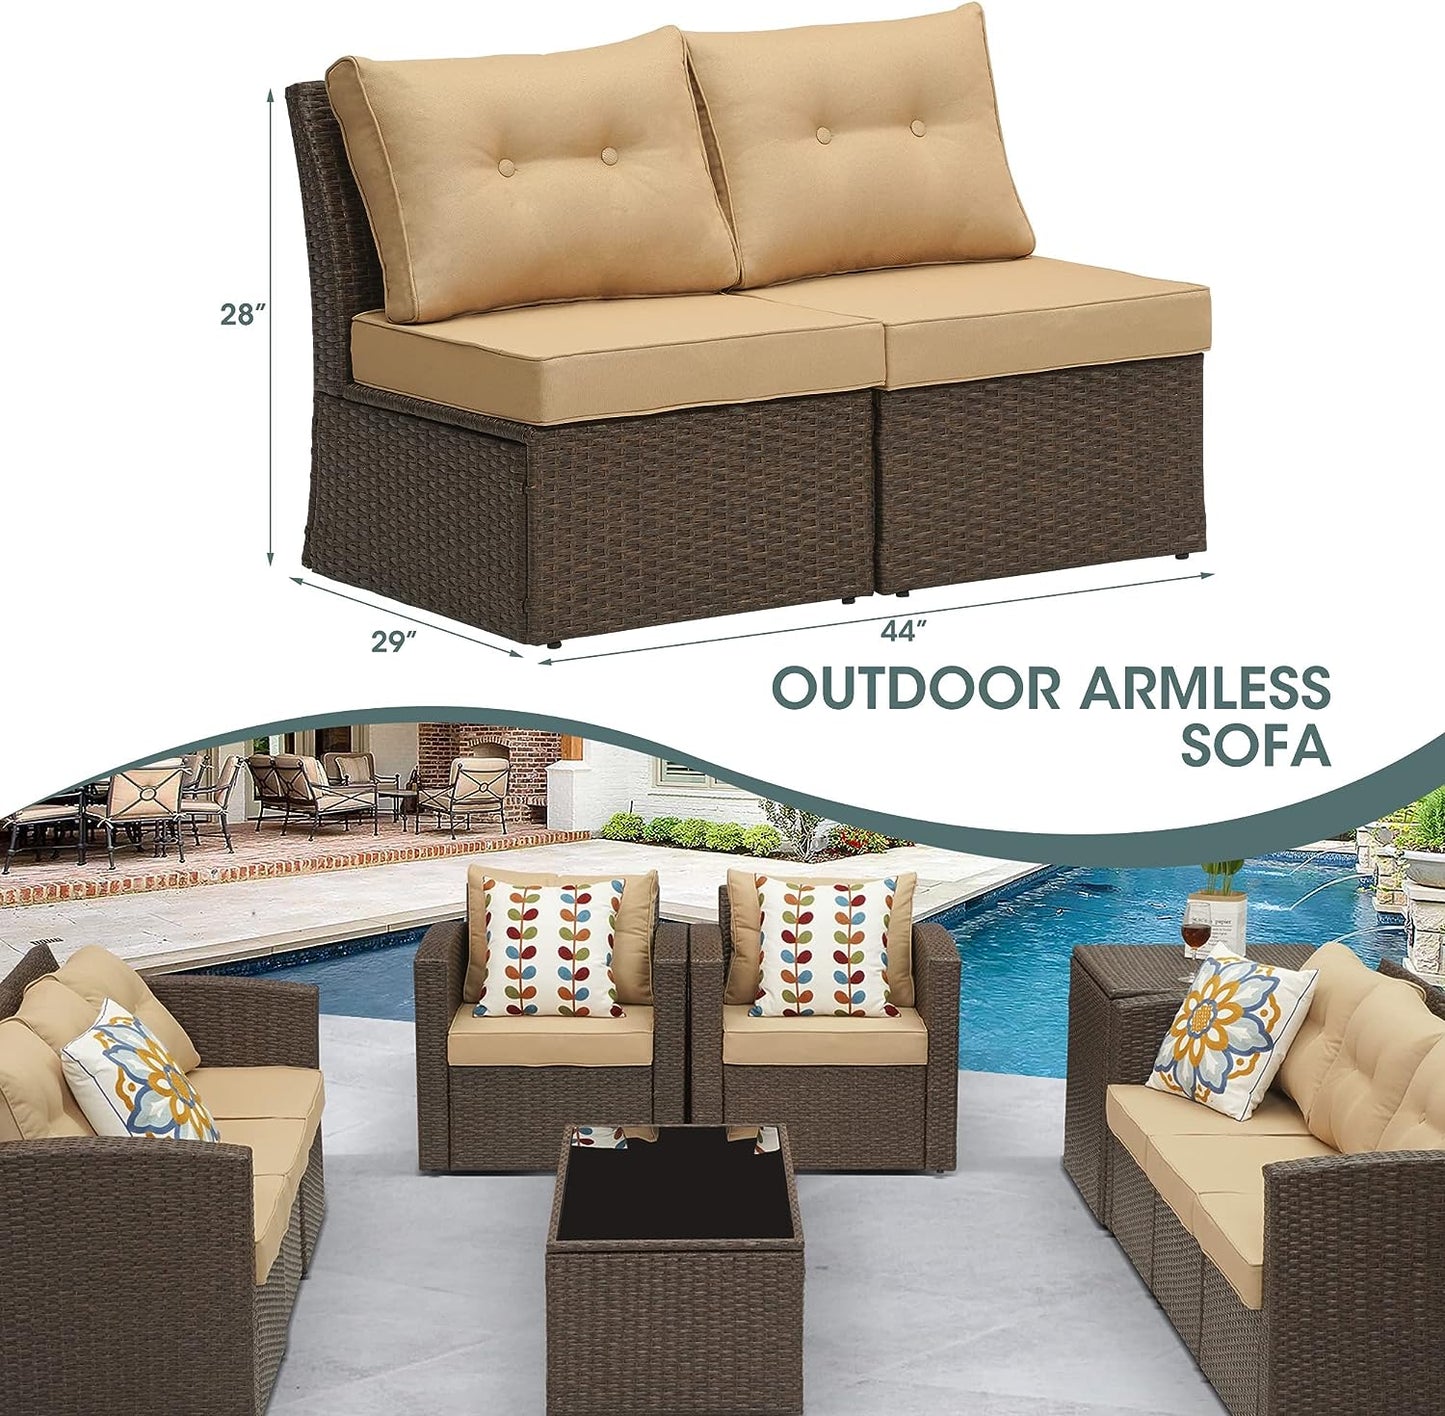 SUNVIVI OUTDOOR Brown Wicker Patio Sofa Chair Armless with Beige Cushions, Aluminum Frame Small Outdoor Couch Chair for Garden Backyard Pool,2 Pieces